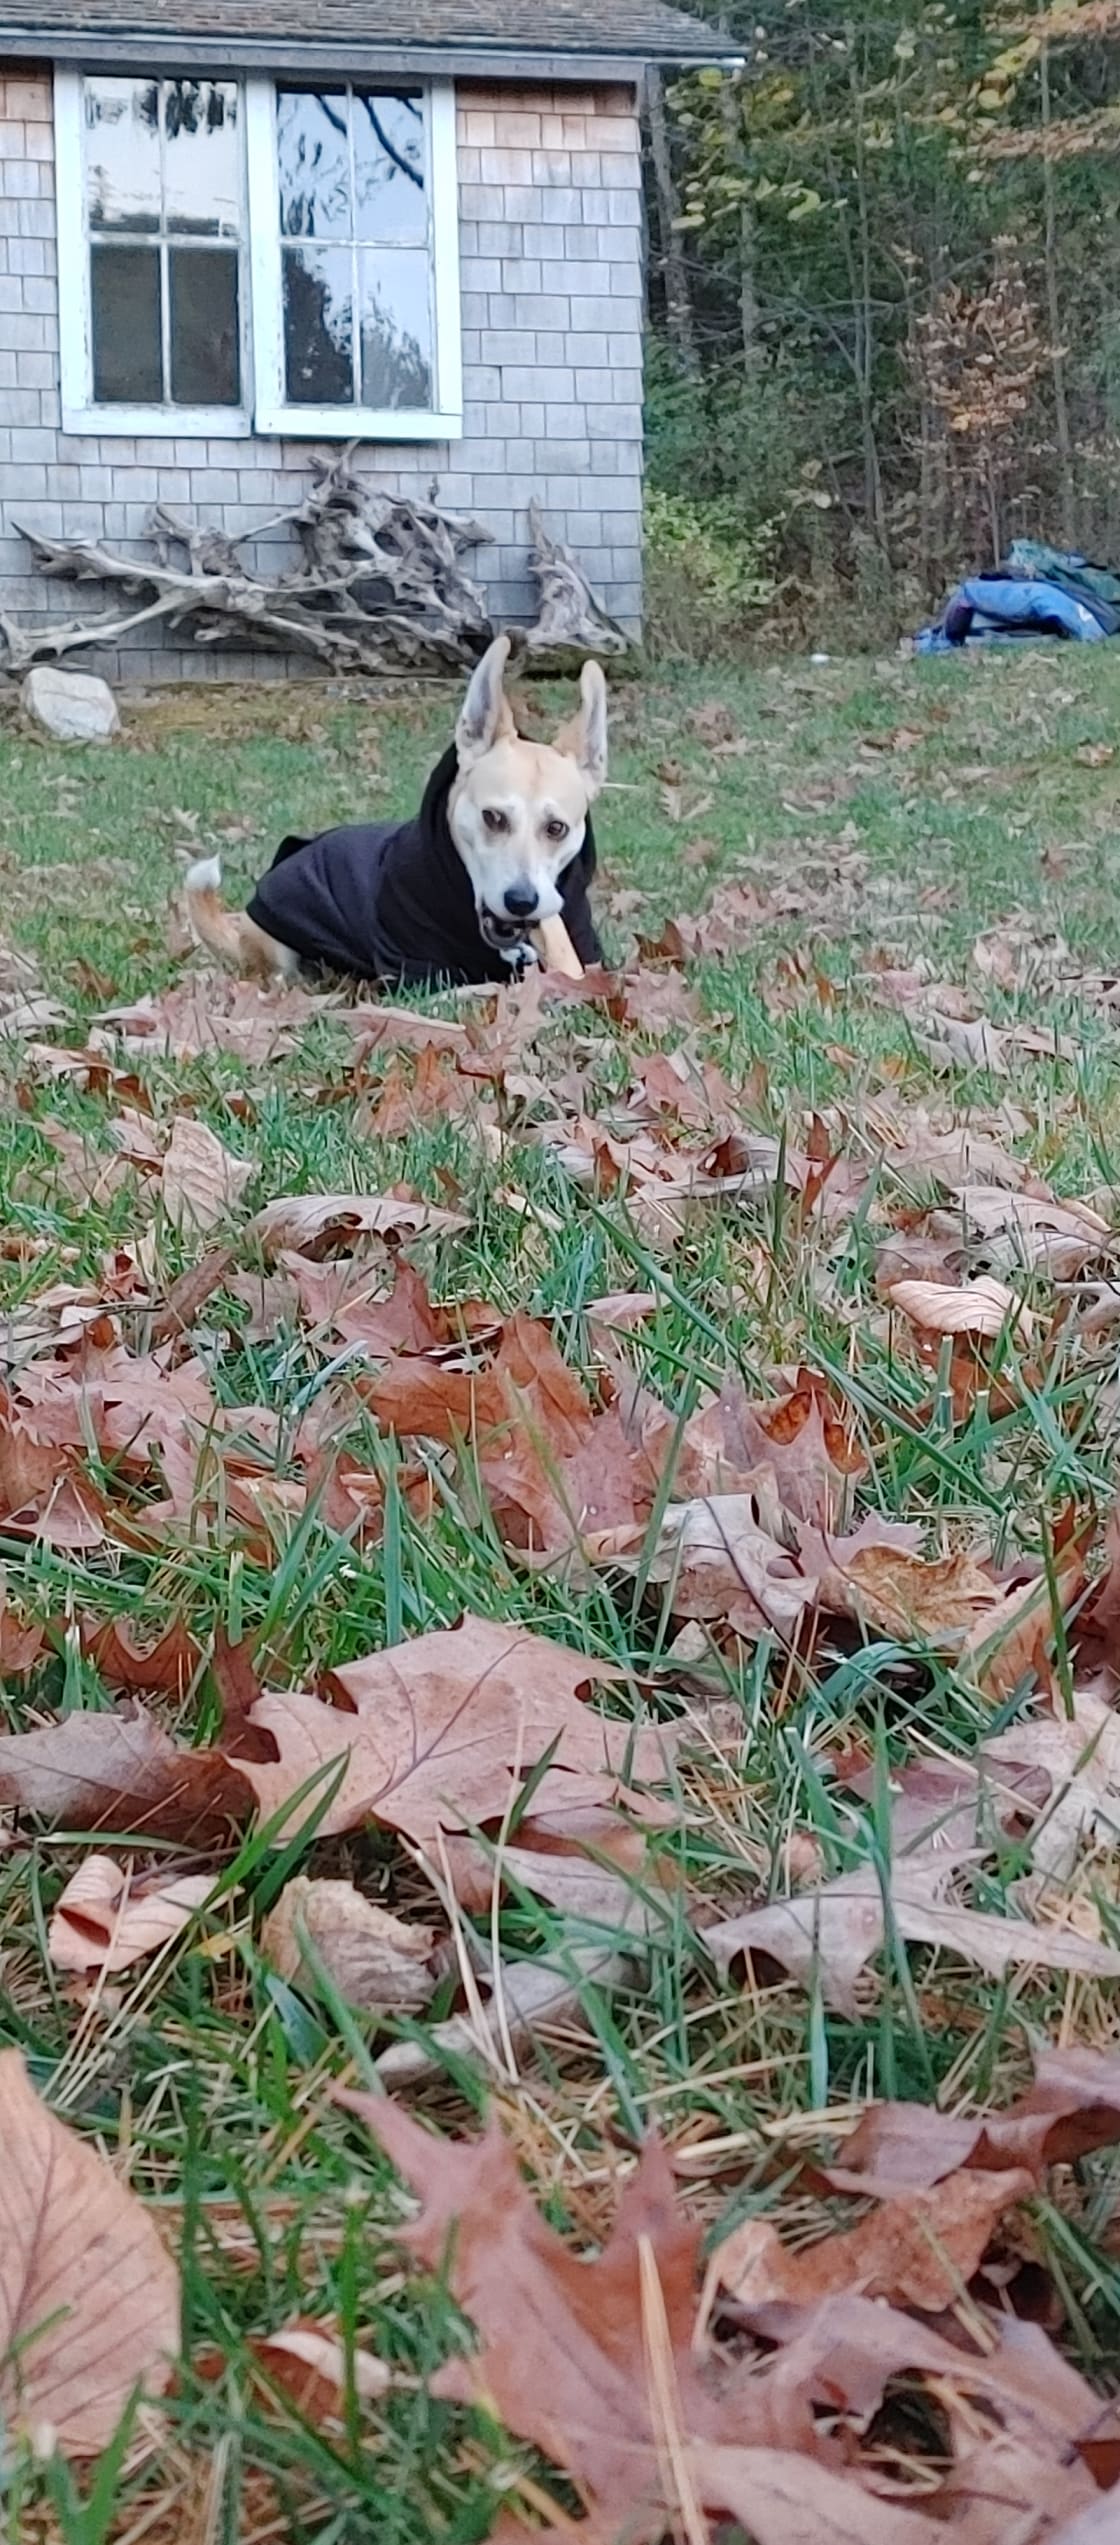 Diamond playing in the leaves